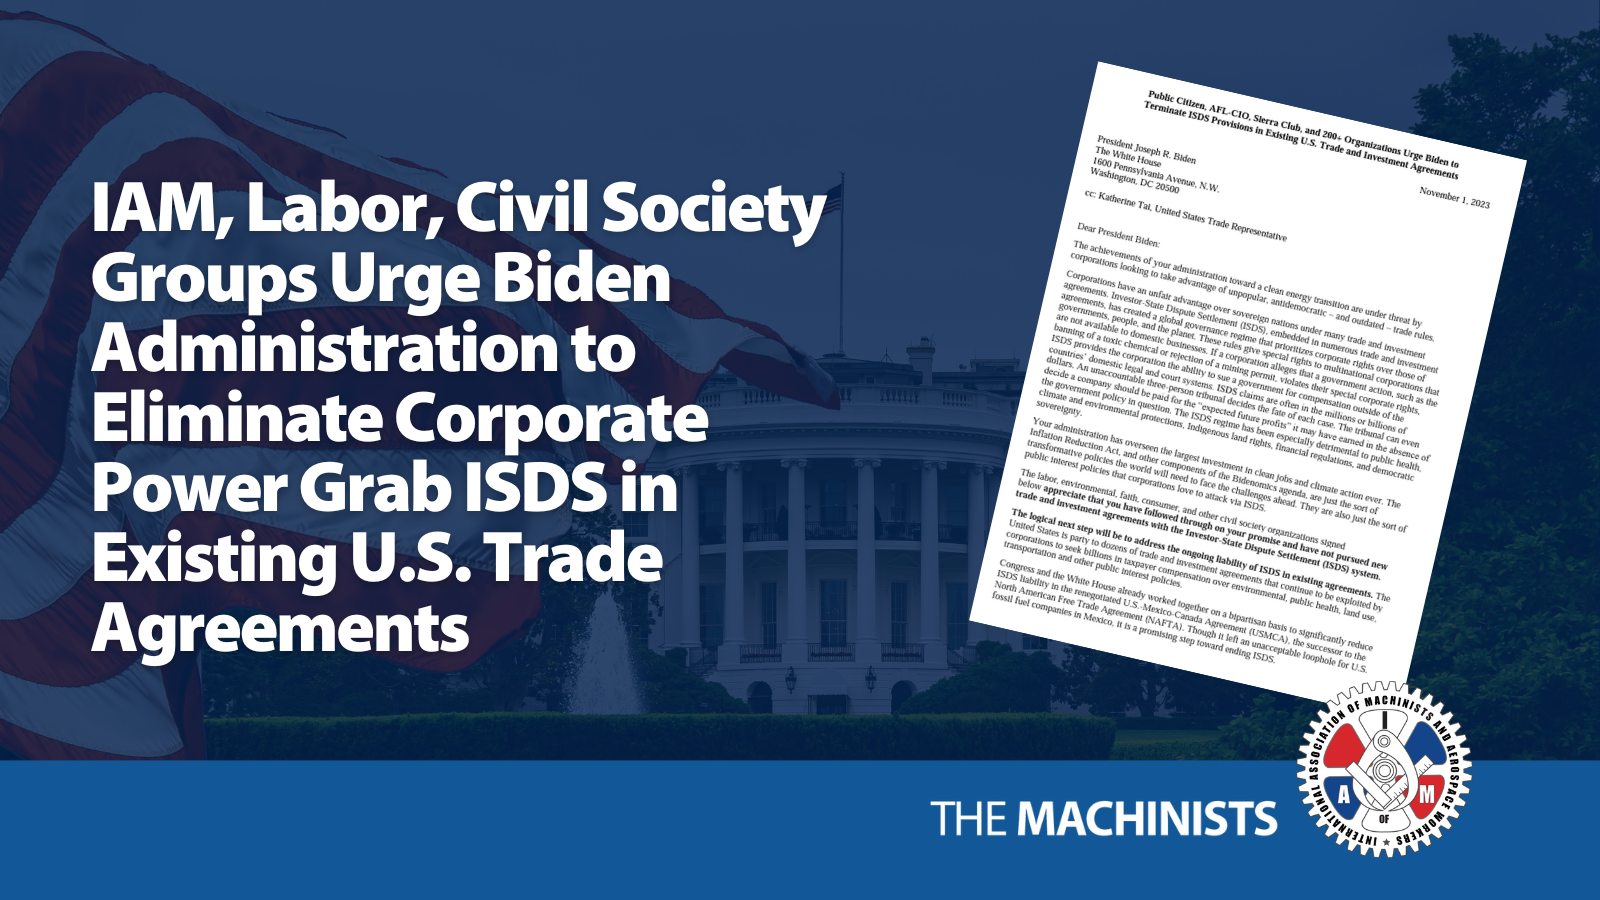 IAM, Labor, Civil Society Groups Urge Biden Administration to Eliminate Corporate Power Grab ISDS in Existing U.S. Trade Agreements